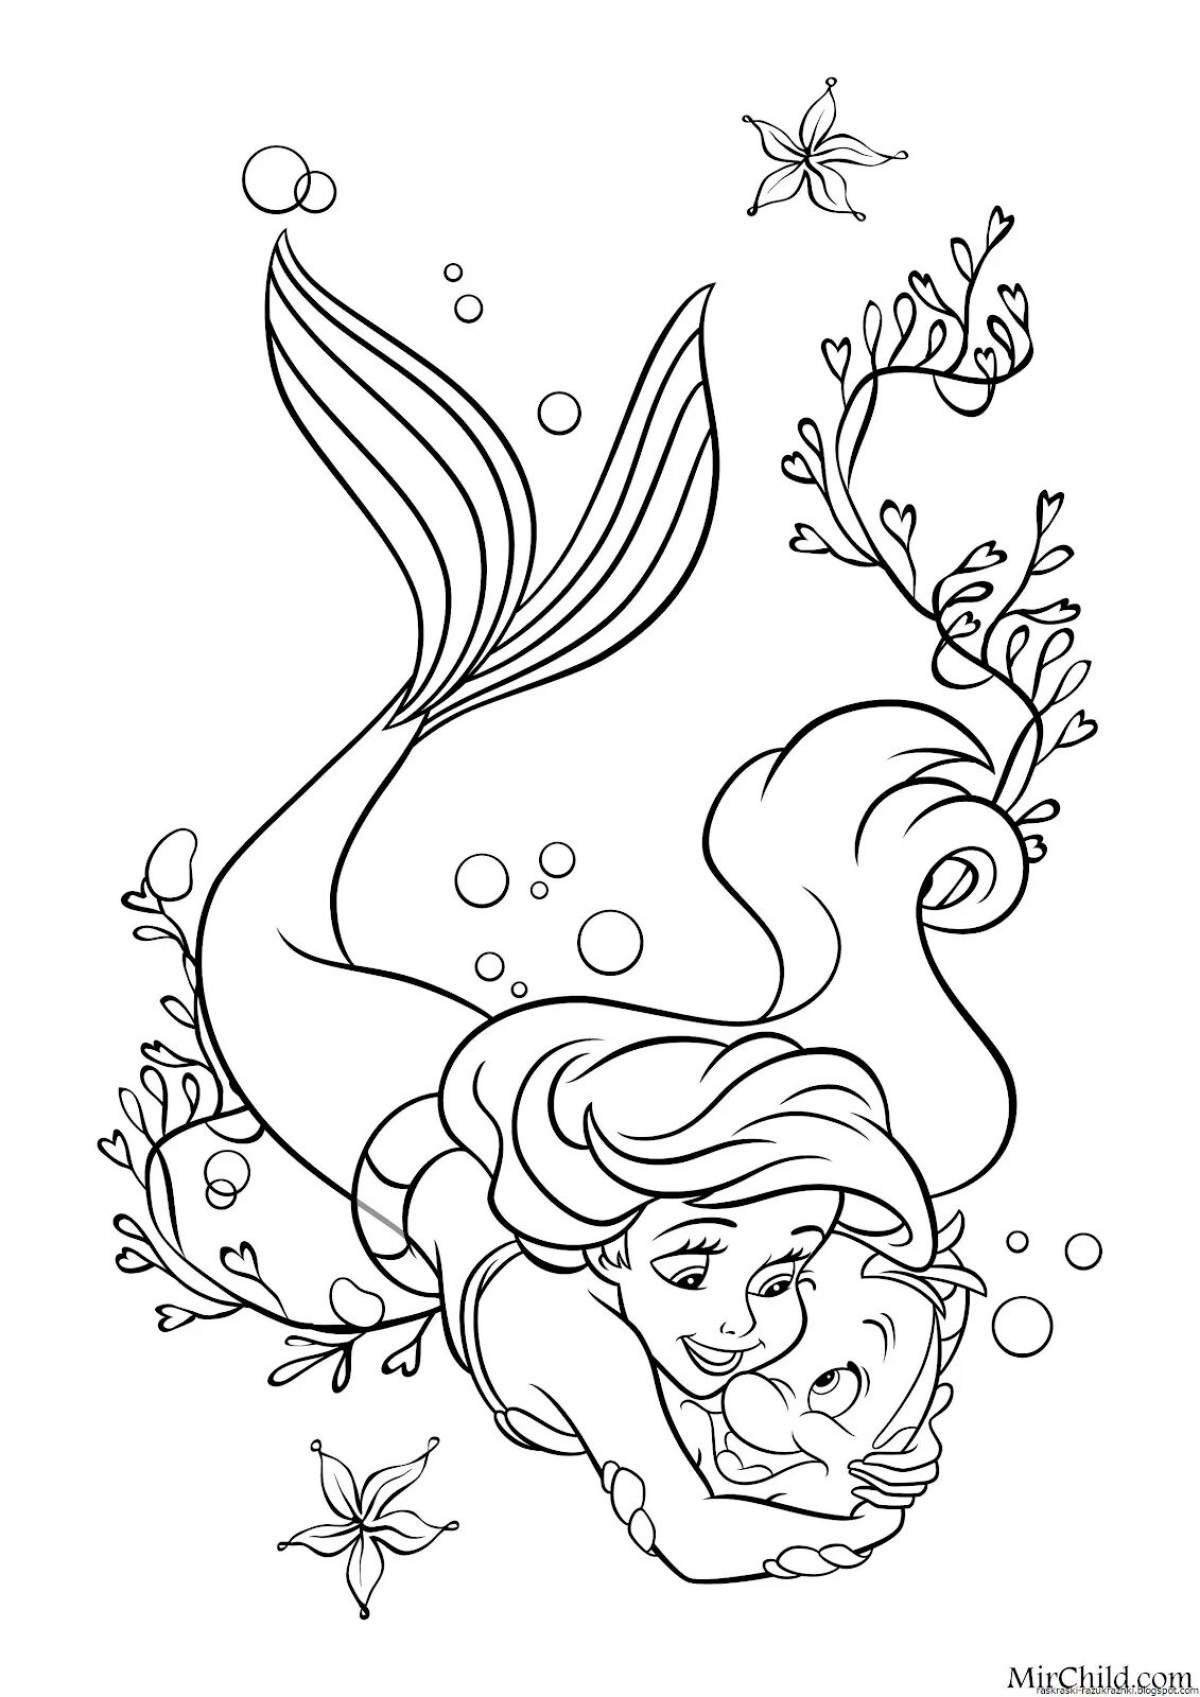 Merry little mermaid coloring book for girls